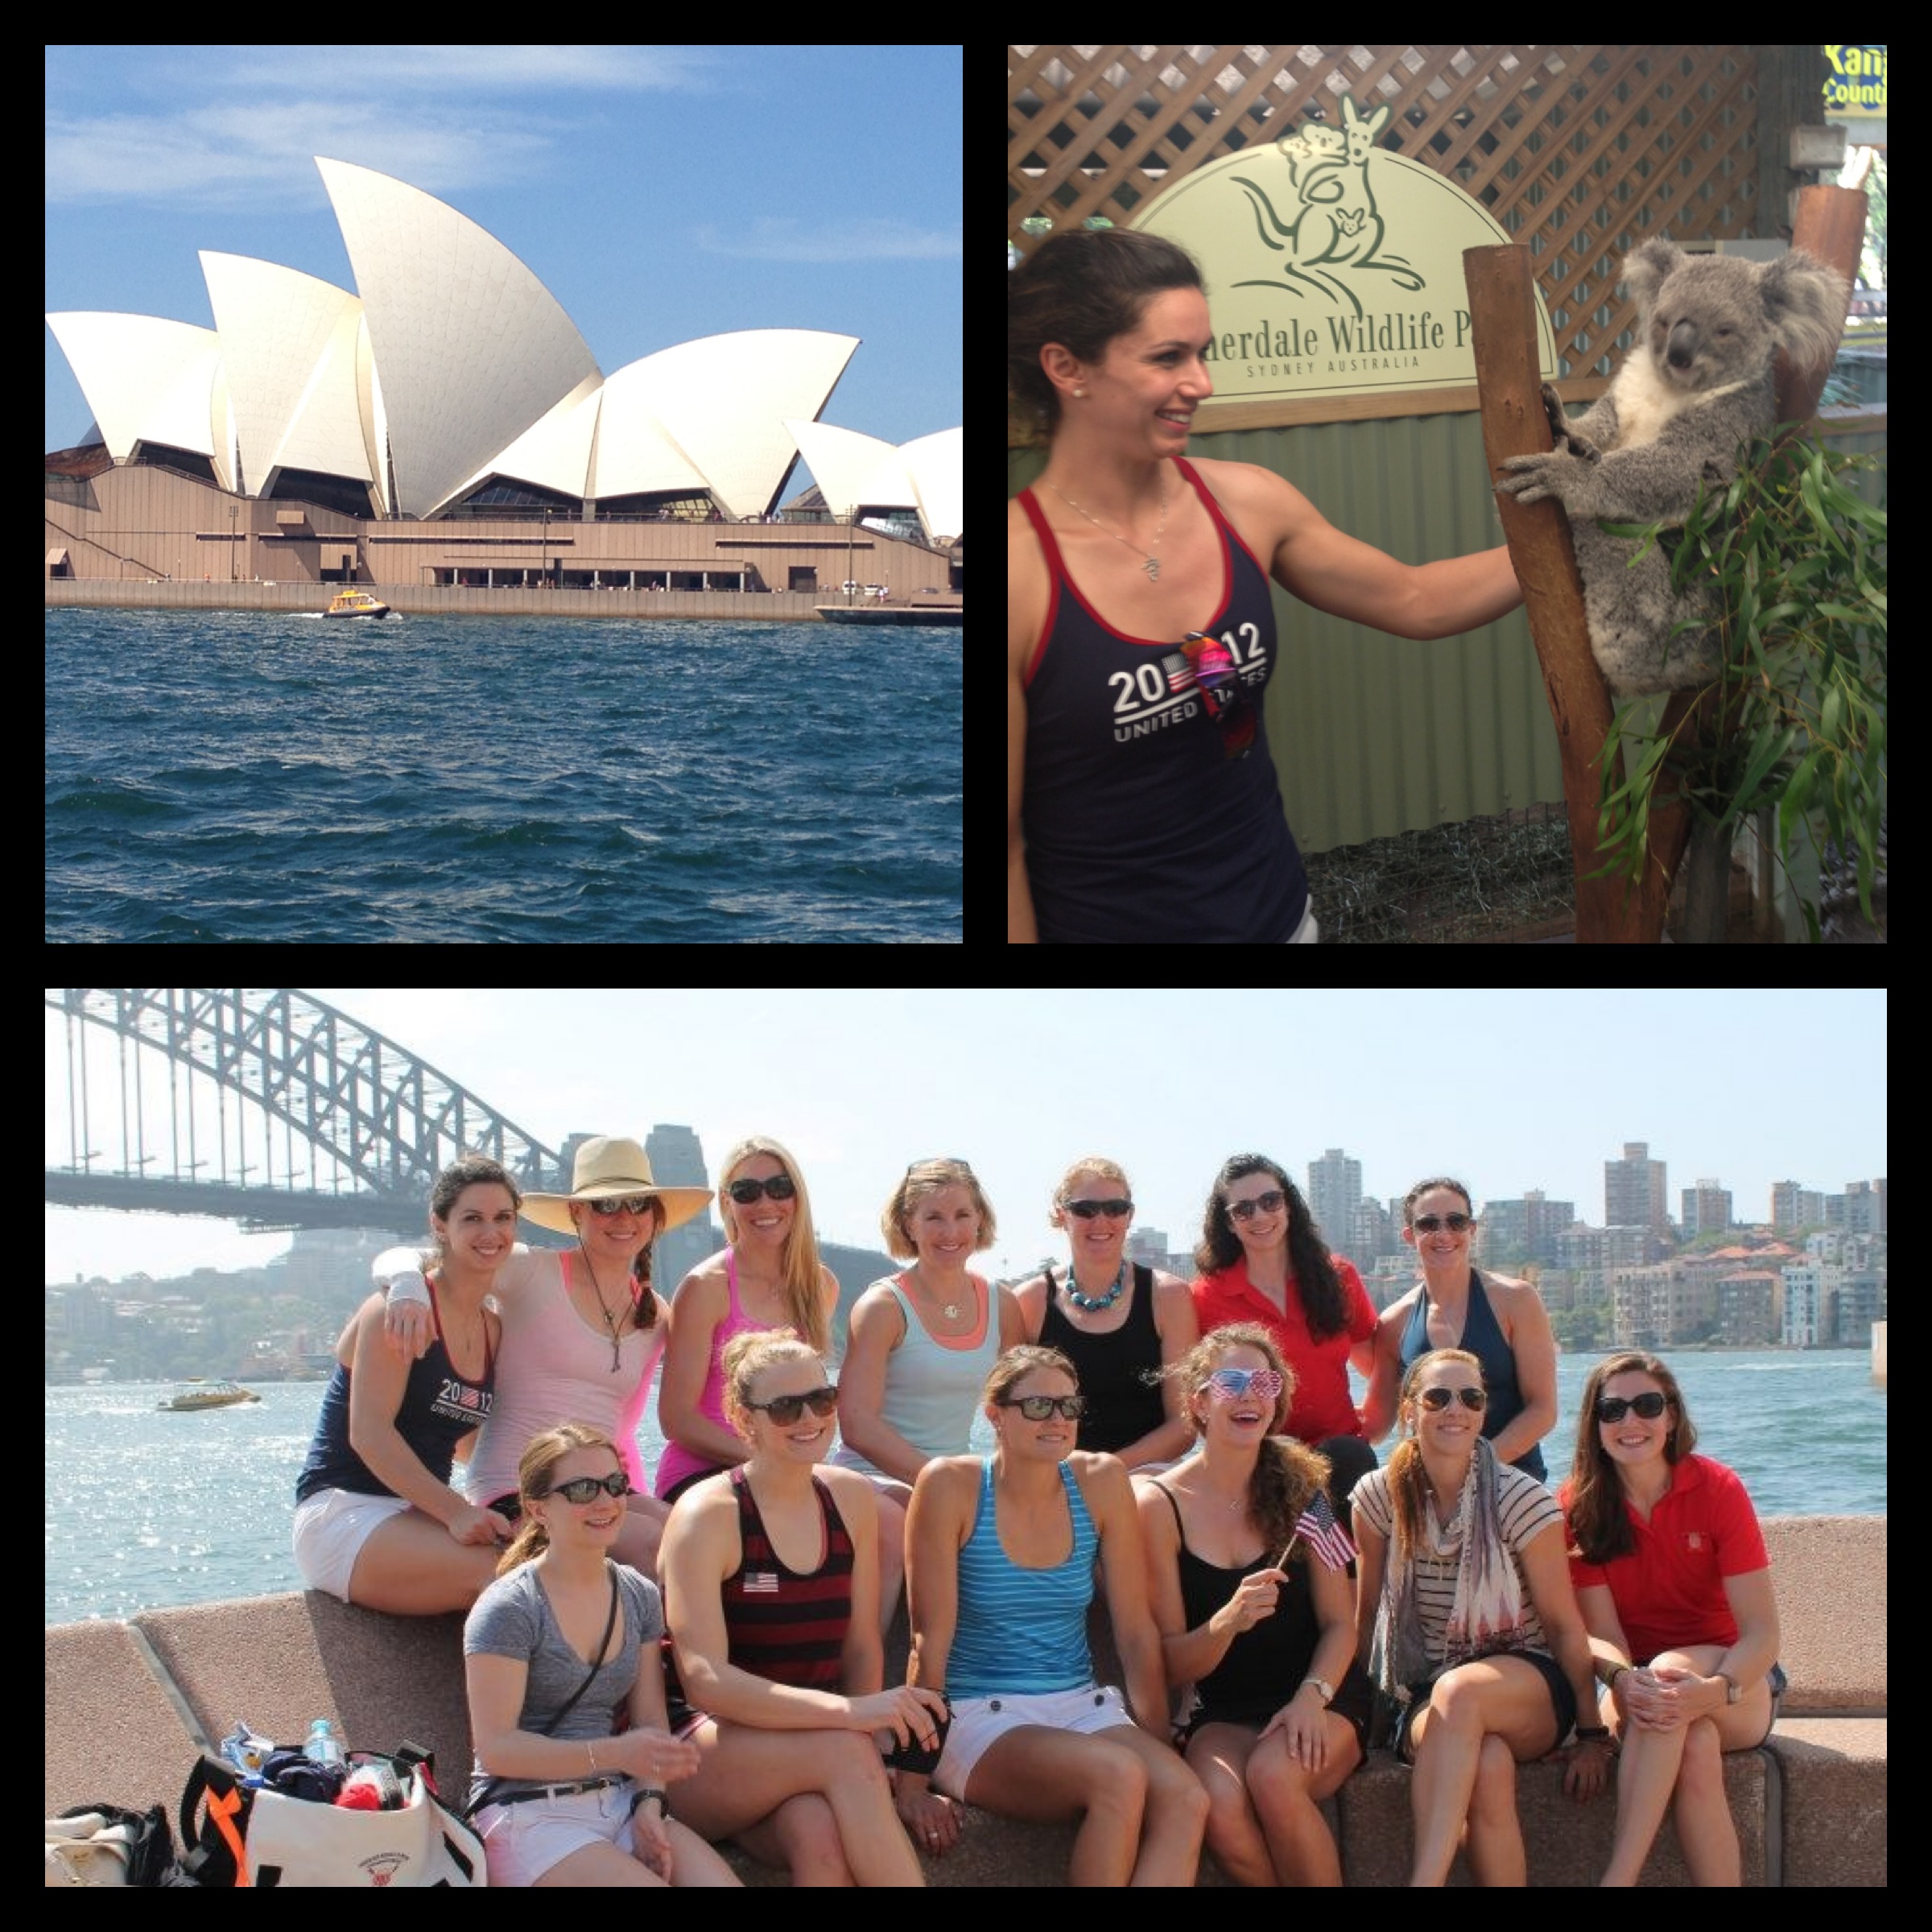 SMACK! At The Races: Sara Hendershot’s Experience At The Rowing World Cup In Australia